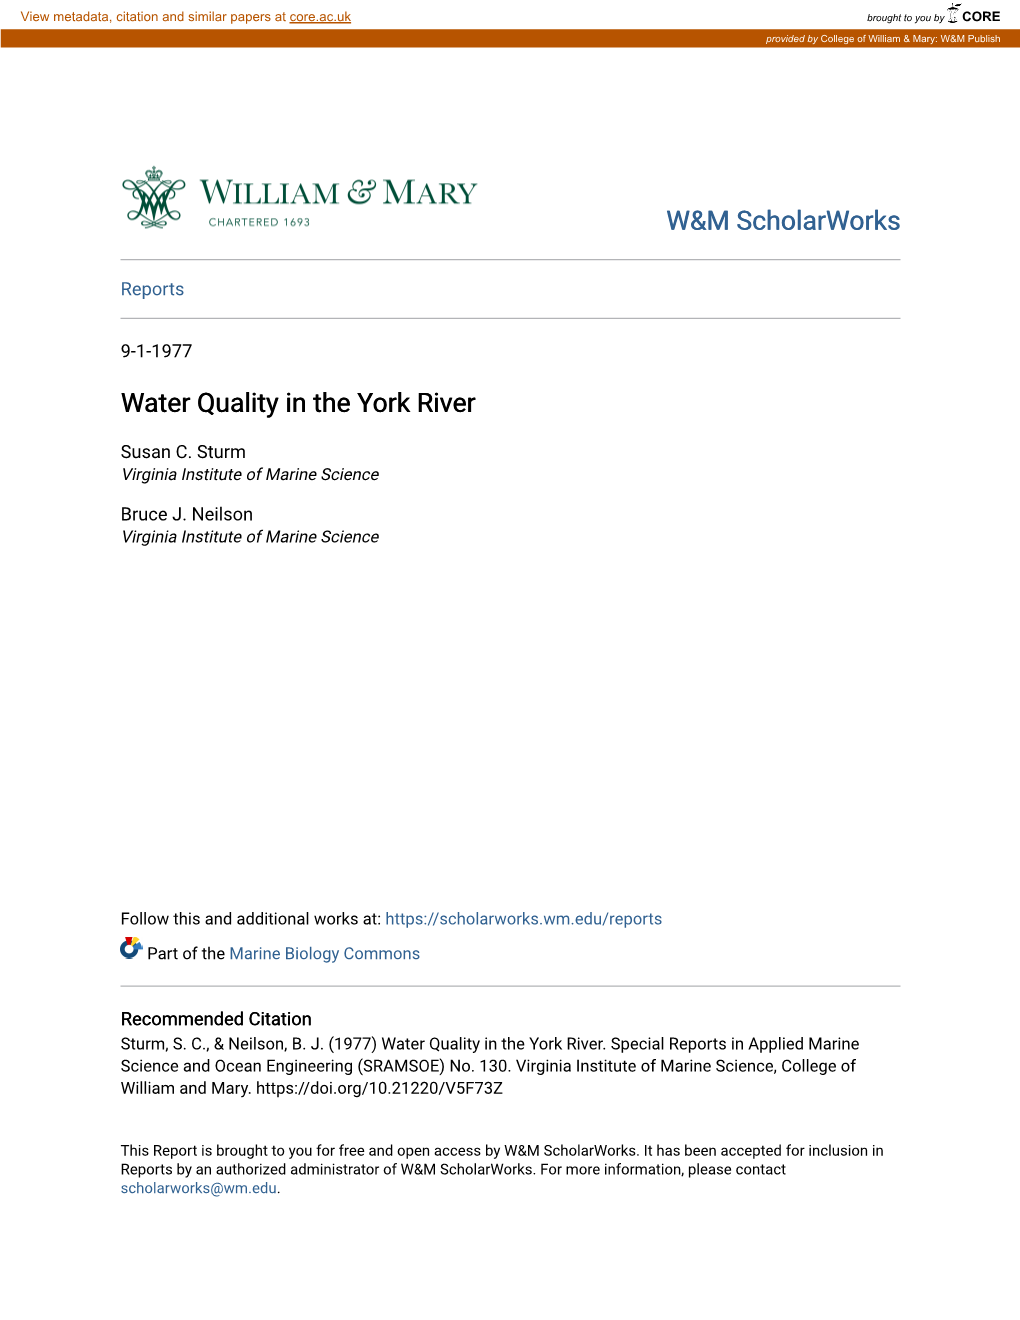 Water Quality in the York River